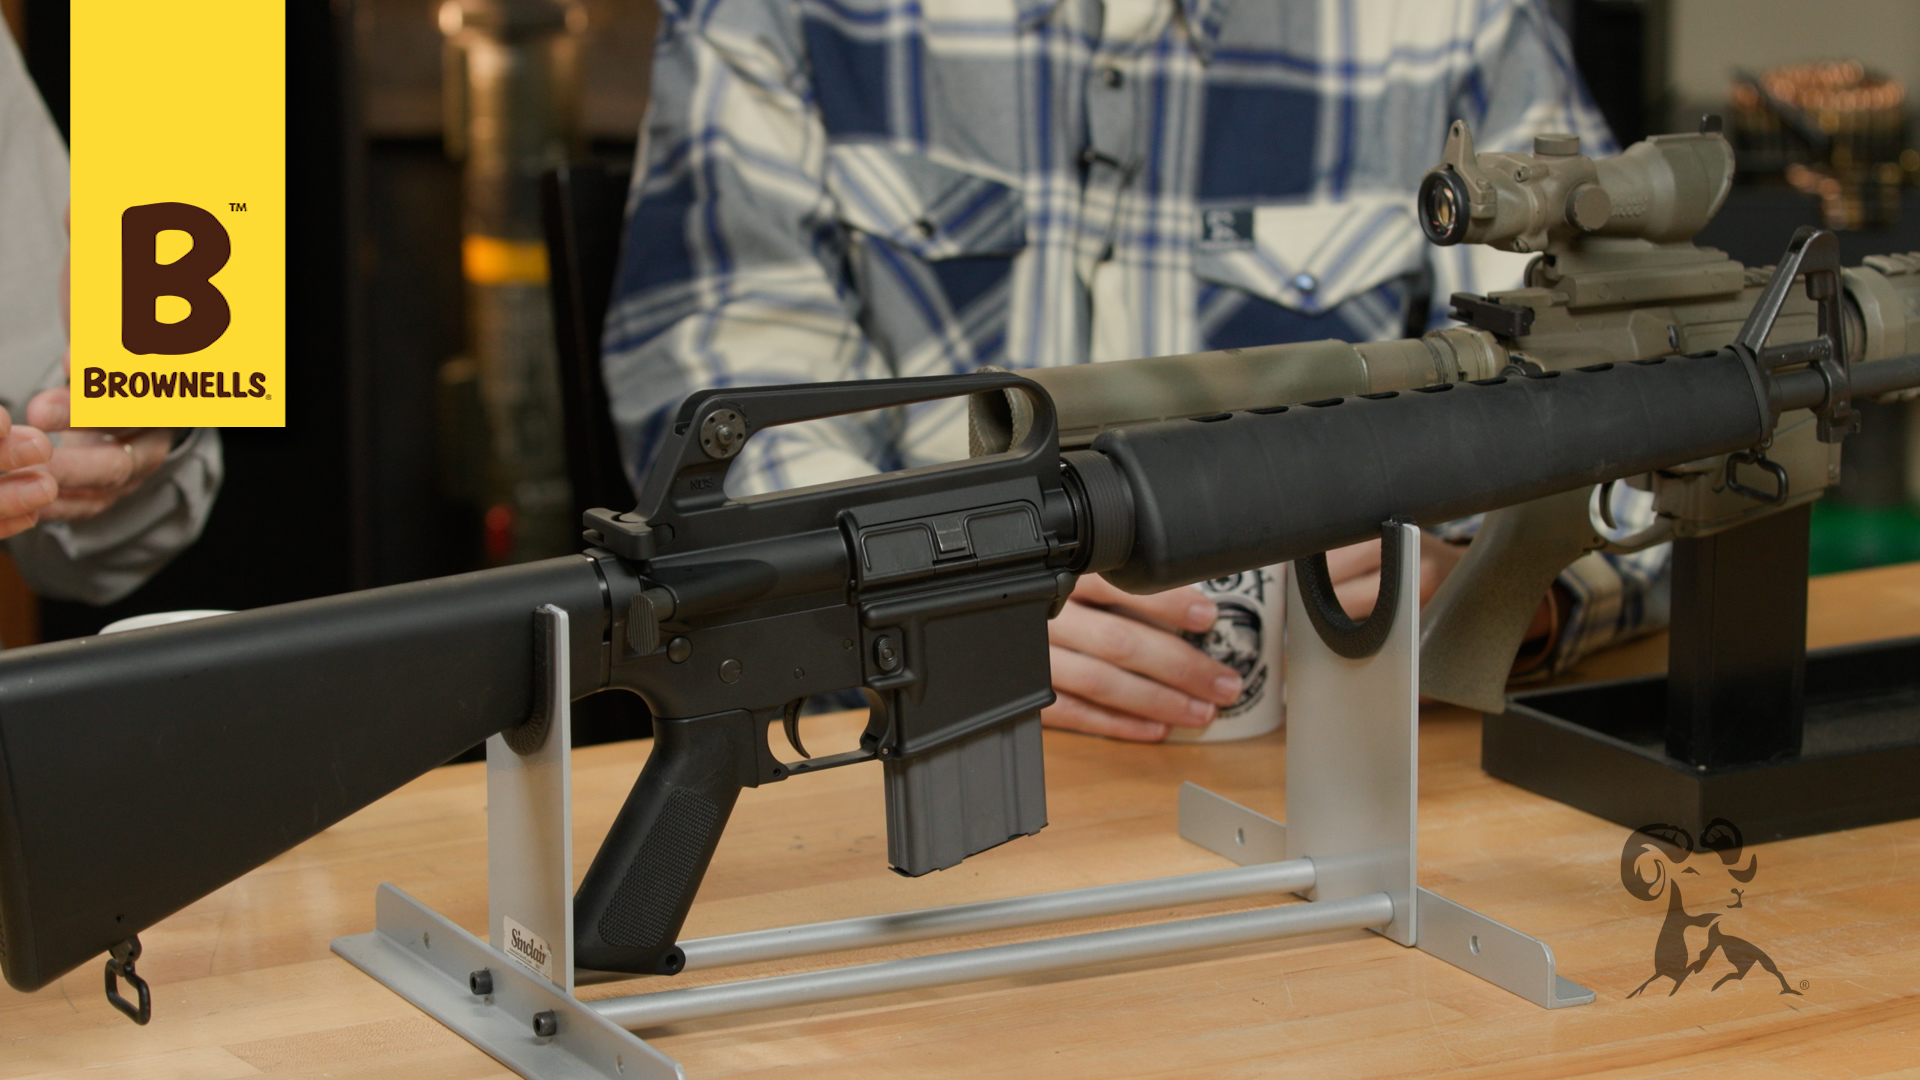 Smyth Busters: What Qualifies as a "Clone" Rifle?